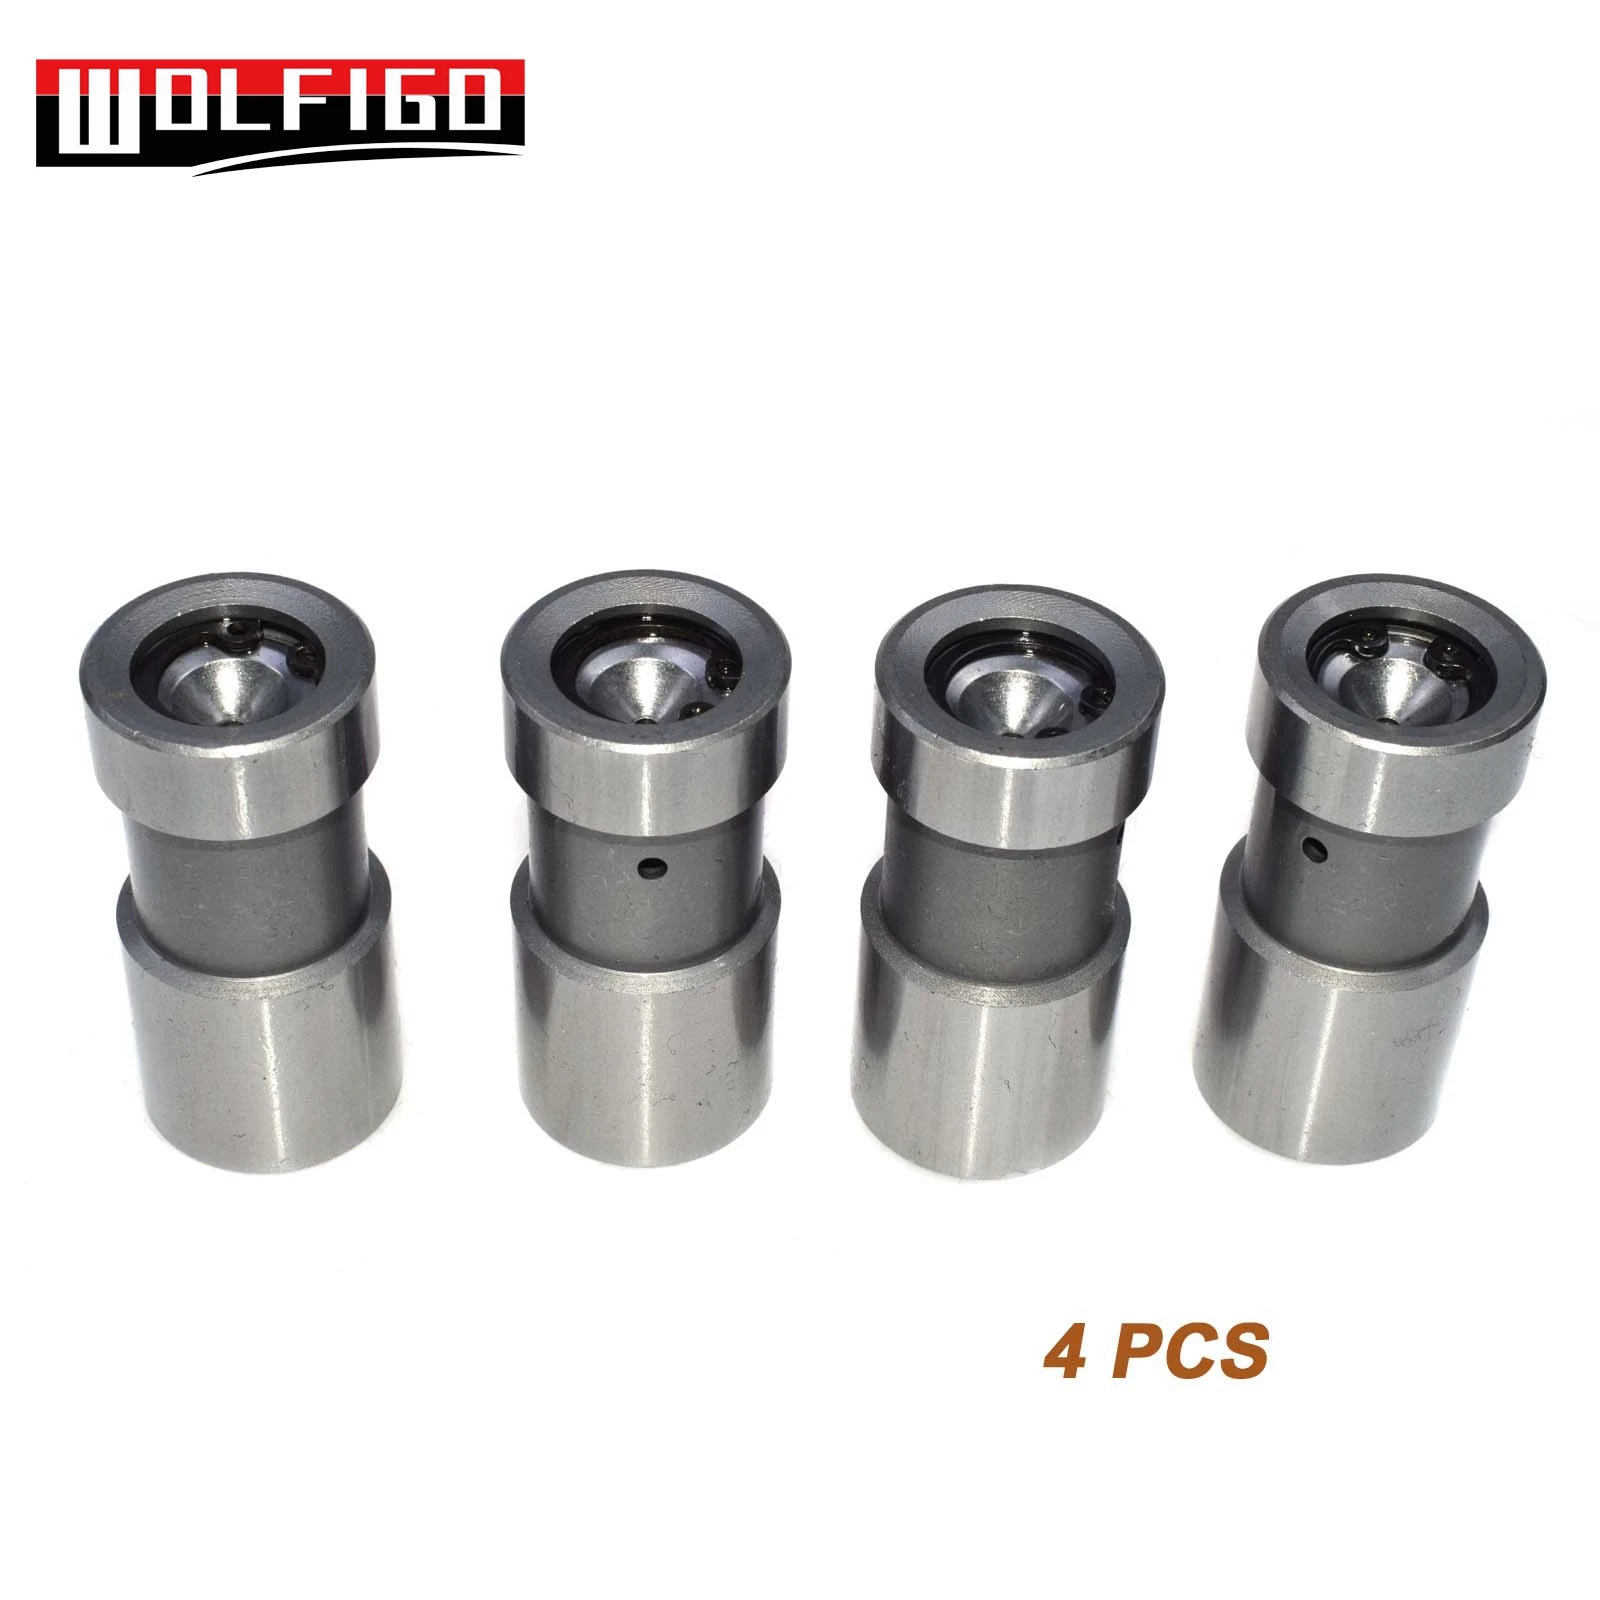 8Pcs Camshaft Follower Hydraulic Lifters For VW Transporter Vanagon 022109309 